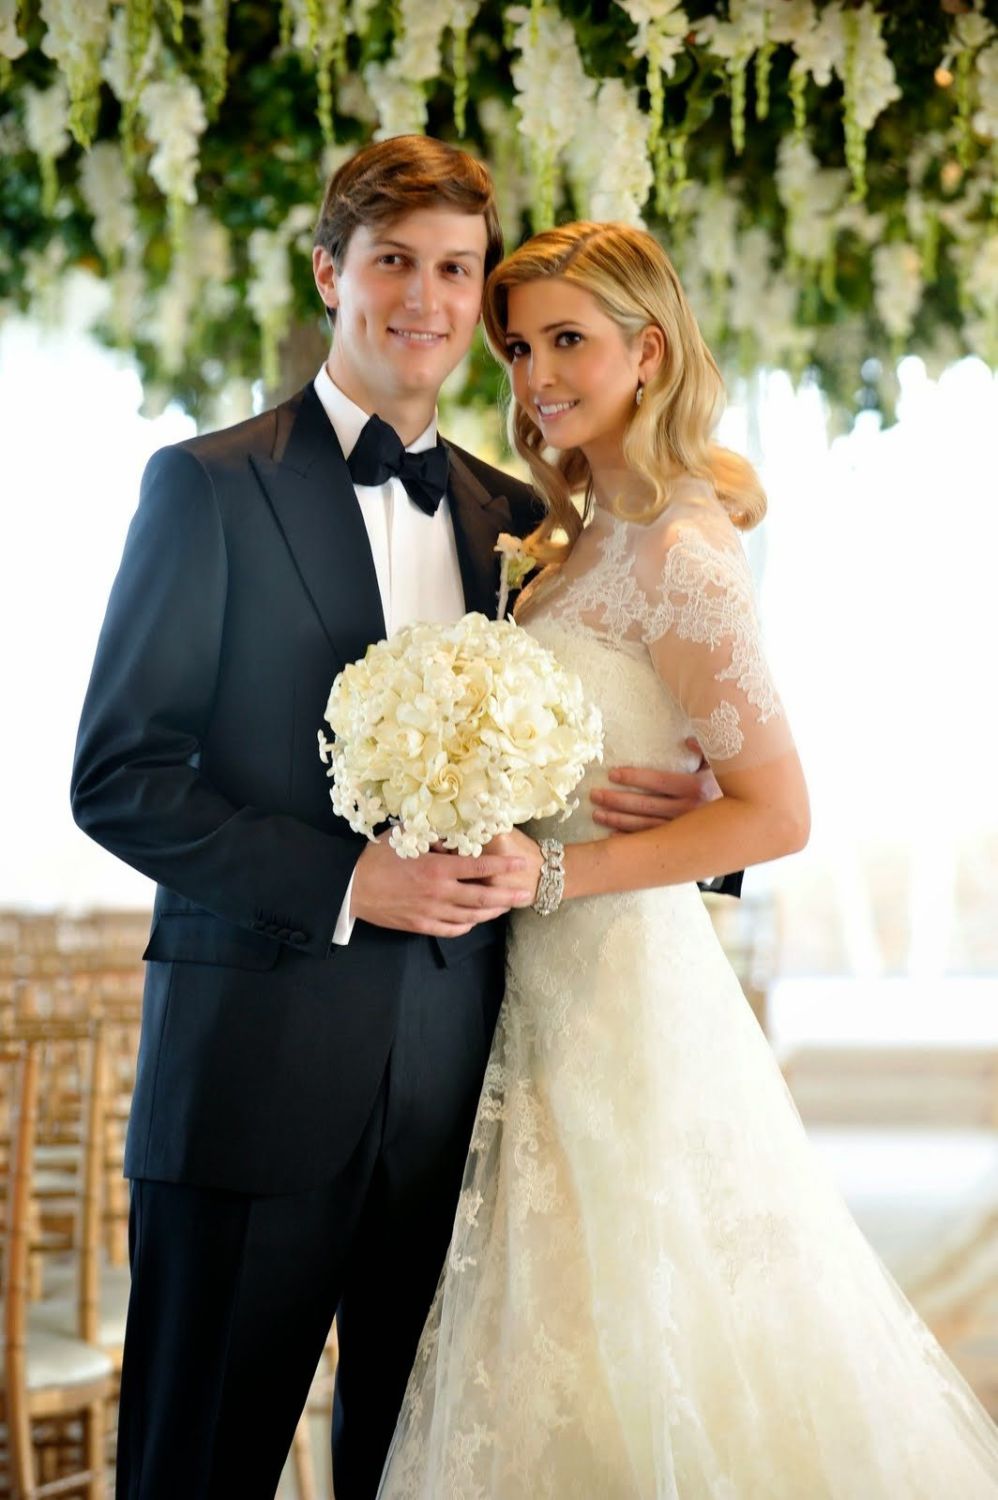 Great Ivana Trump Wedding Dress of the decade Check it out now 